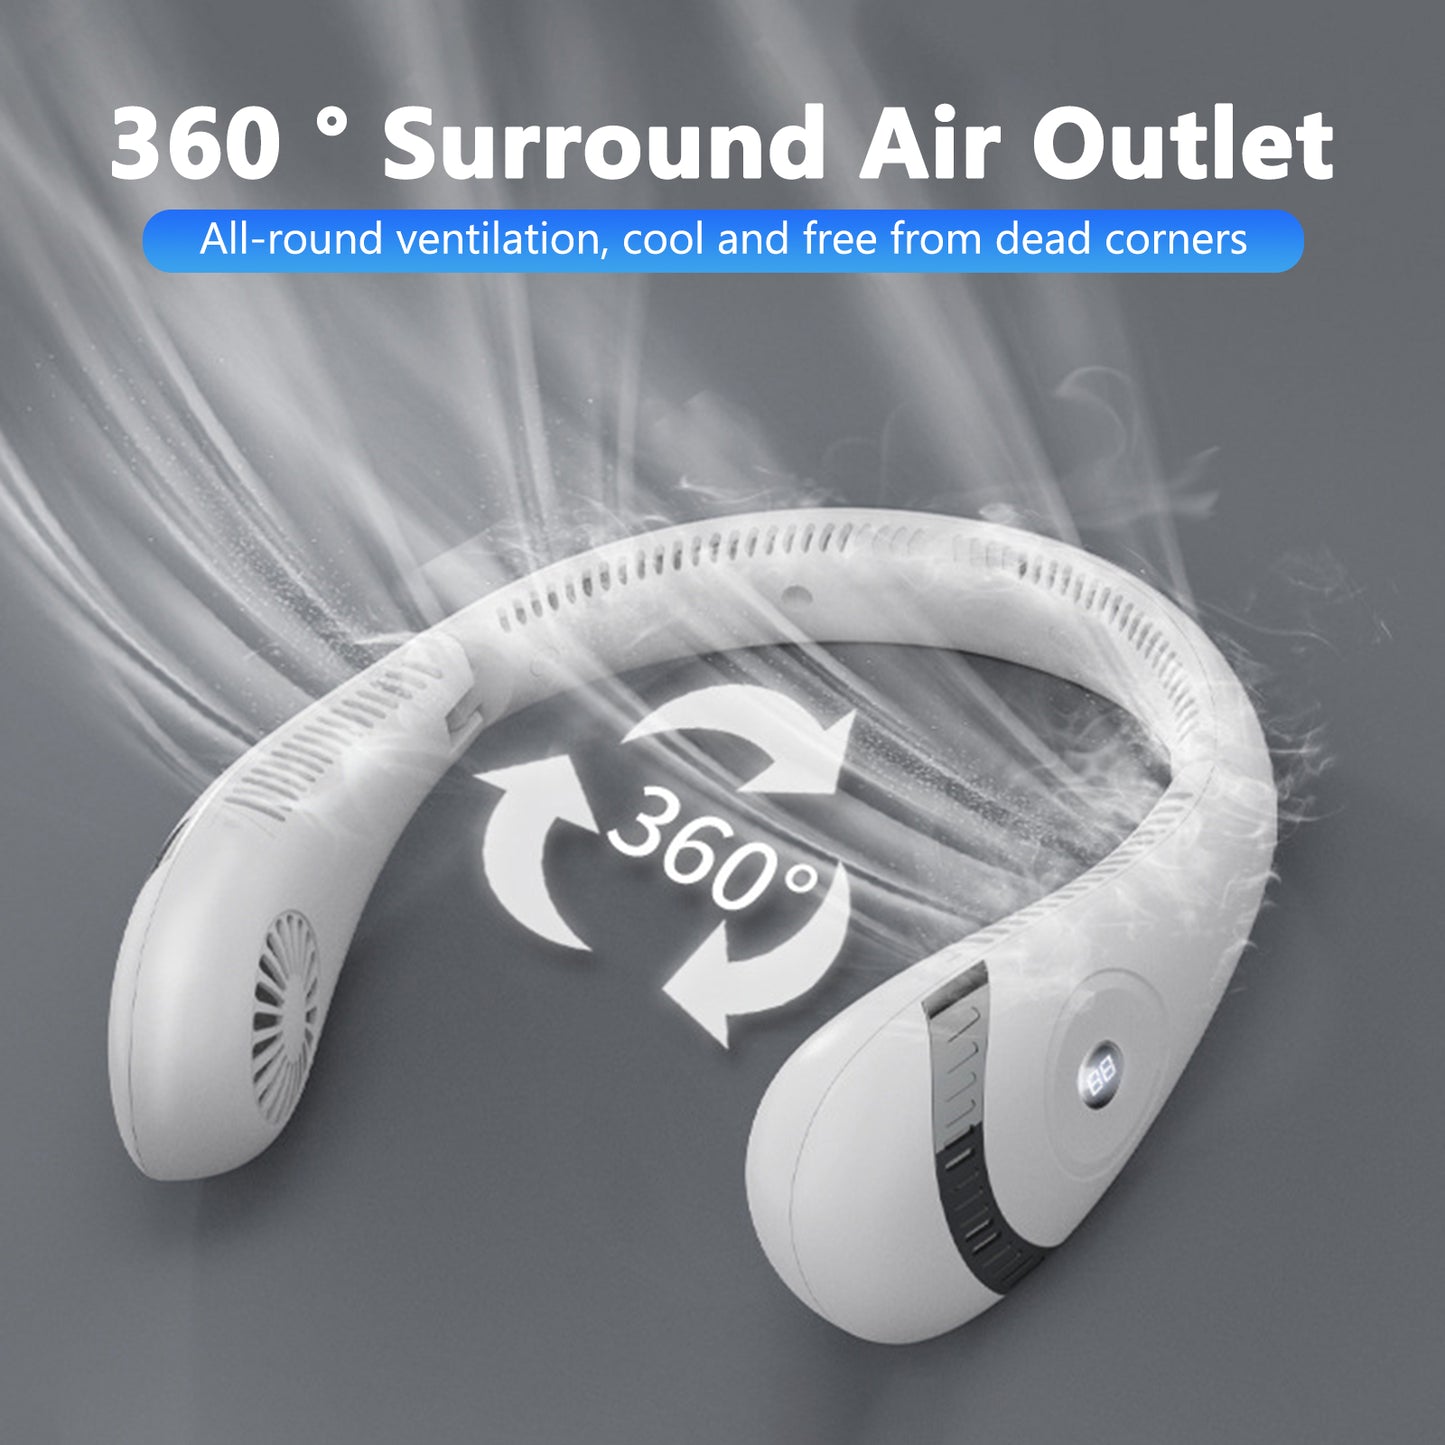 Portable USB Hanging Neck Fan Cooling Air Cooler Foldable Air Conditioner Mini